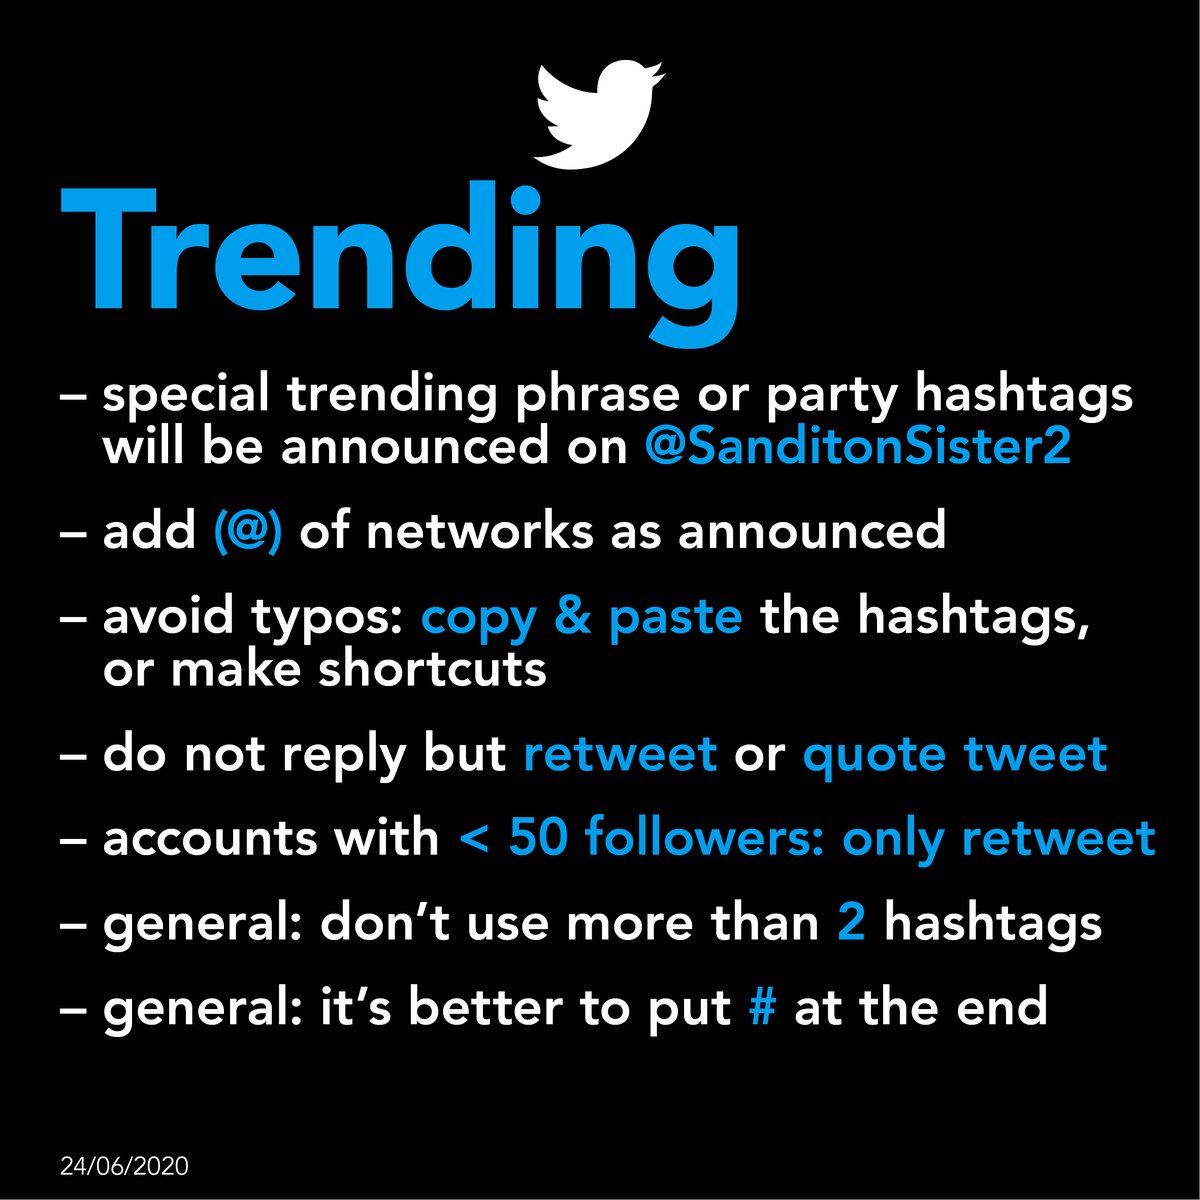  AMAZON TWITTER TRENDING PARTY  Thursday 6 August  8 PM UK =  3 PM EST Trend location: USAPHRASE + tags @: in pic  During the party: don't use extra hashtags Basic Trending Rules: see  pic  #Sanditon  #SaveSanditon 1/3